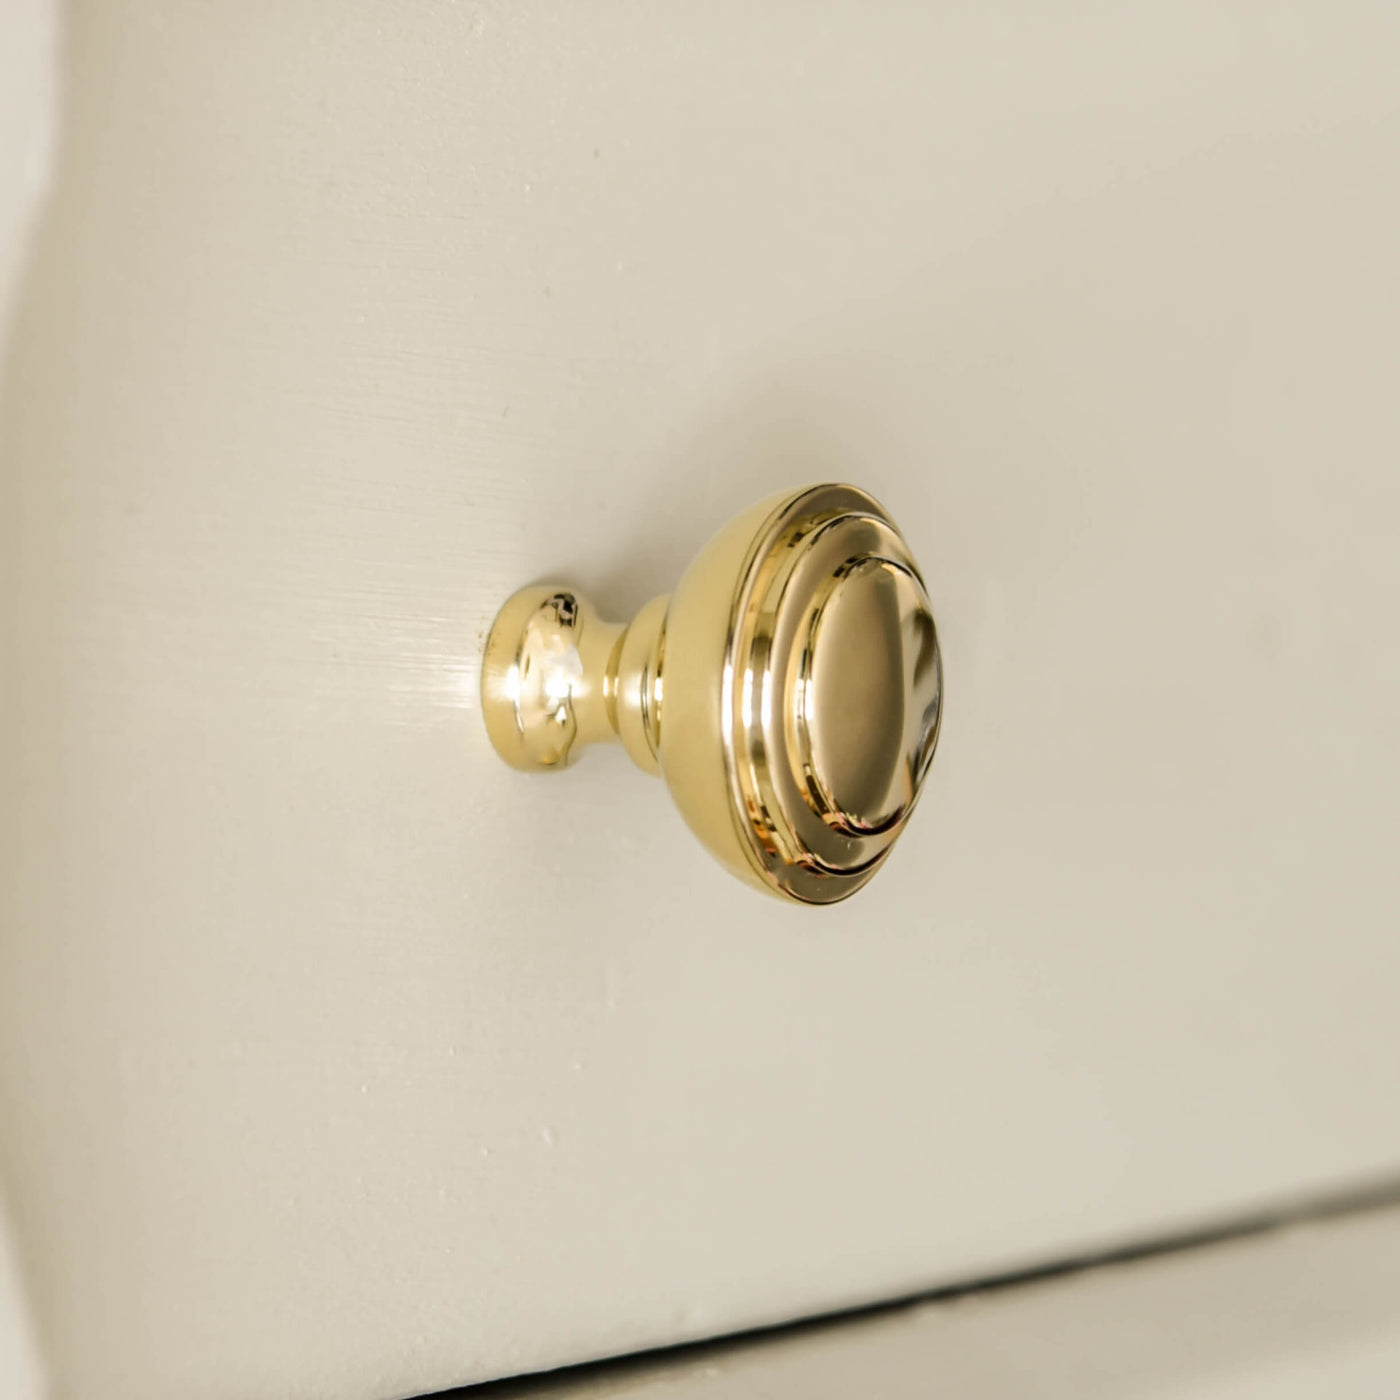 Round brass cabinet knob with ribbed detailing on the front seen on an off white painted drawer